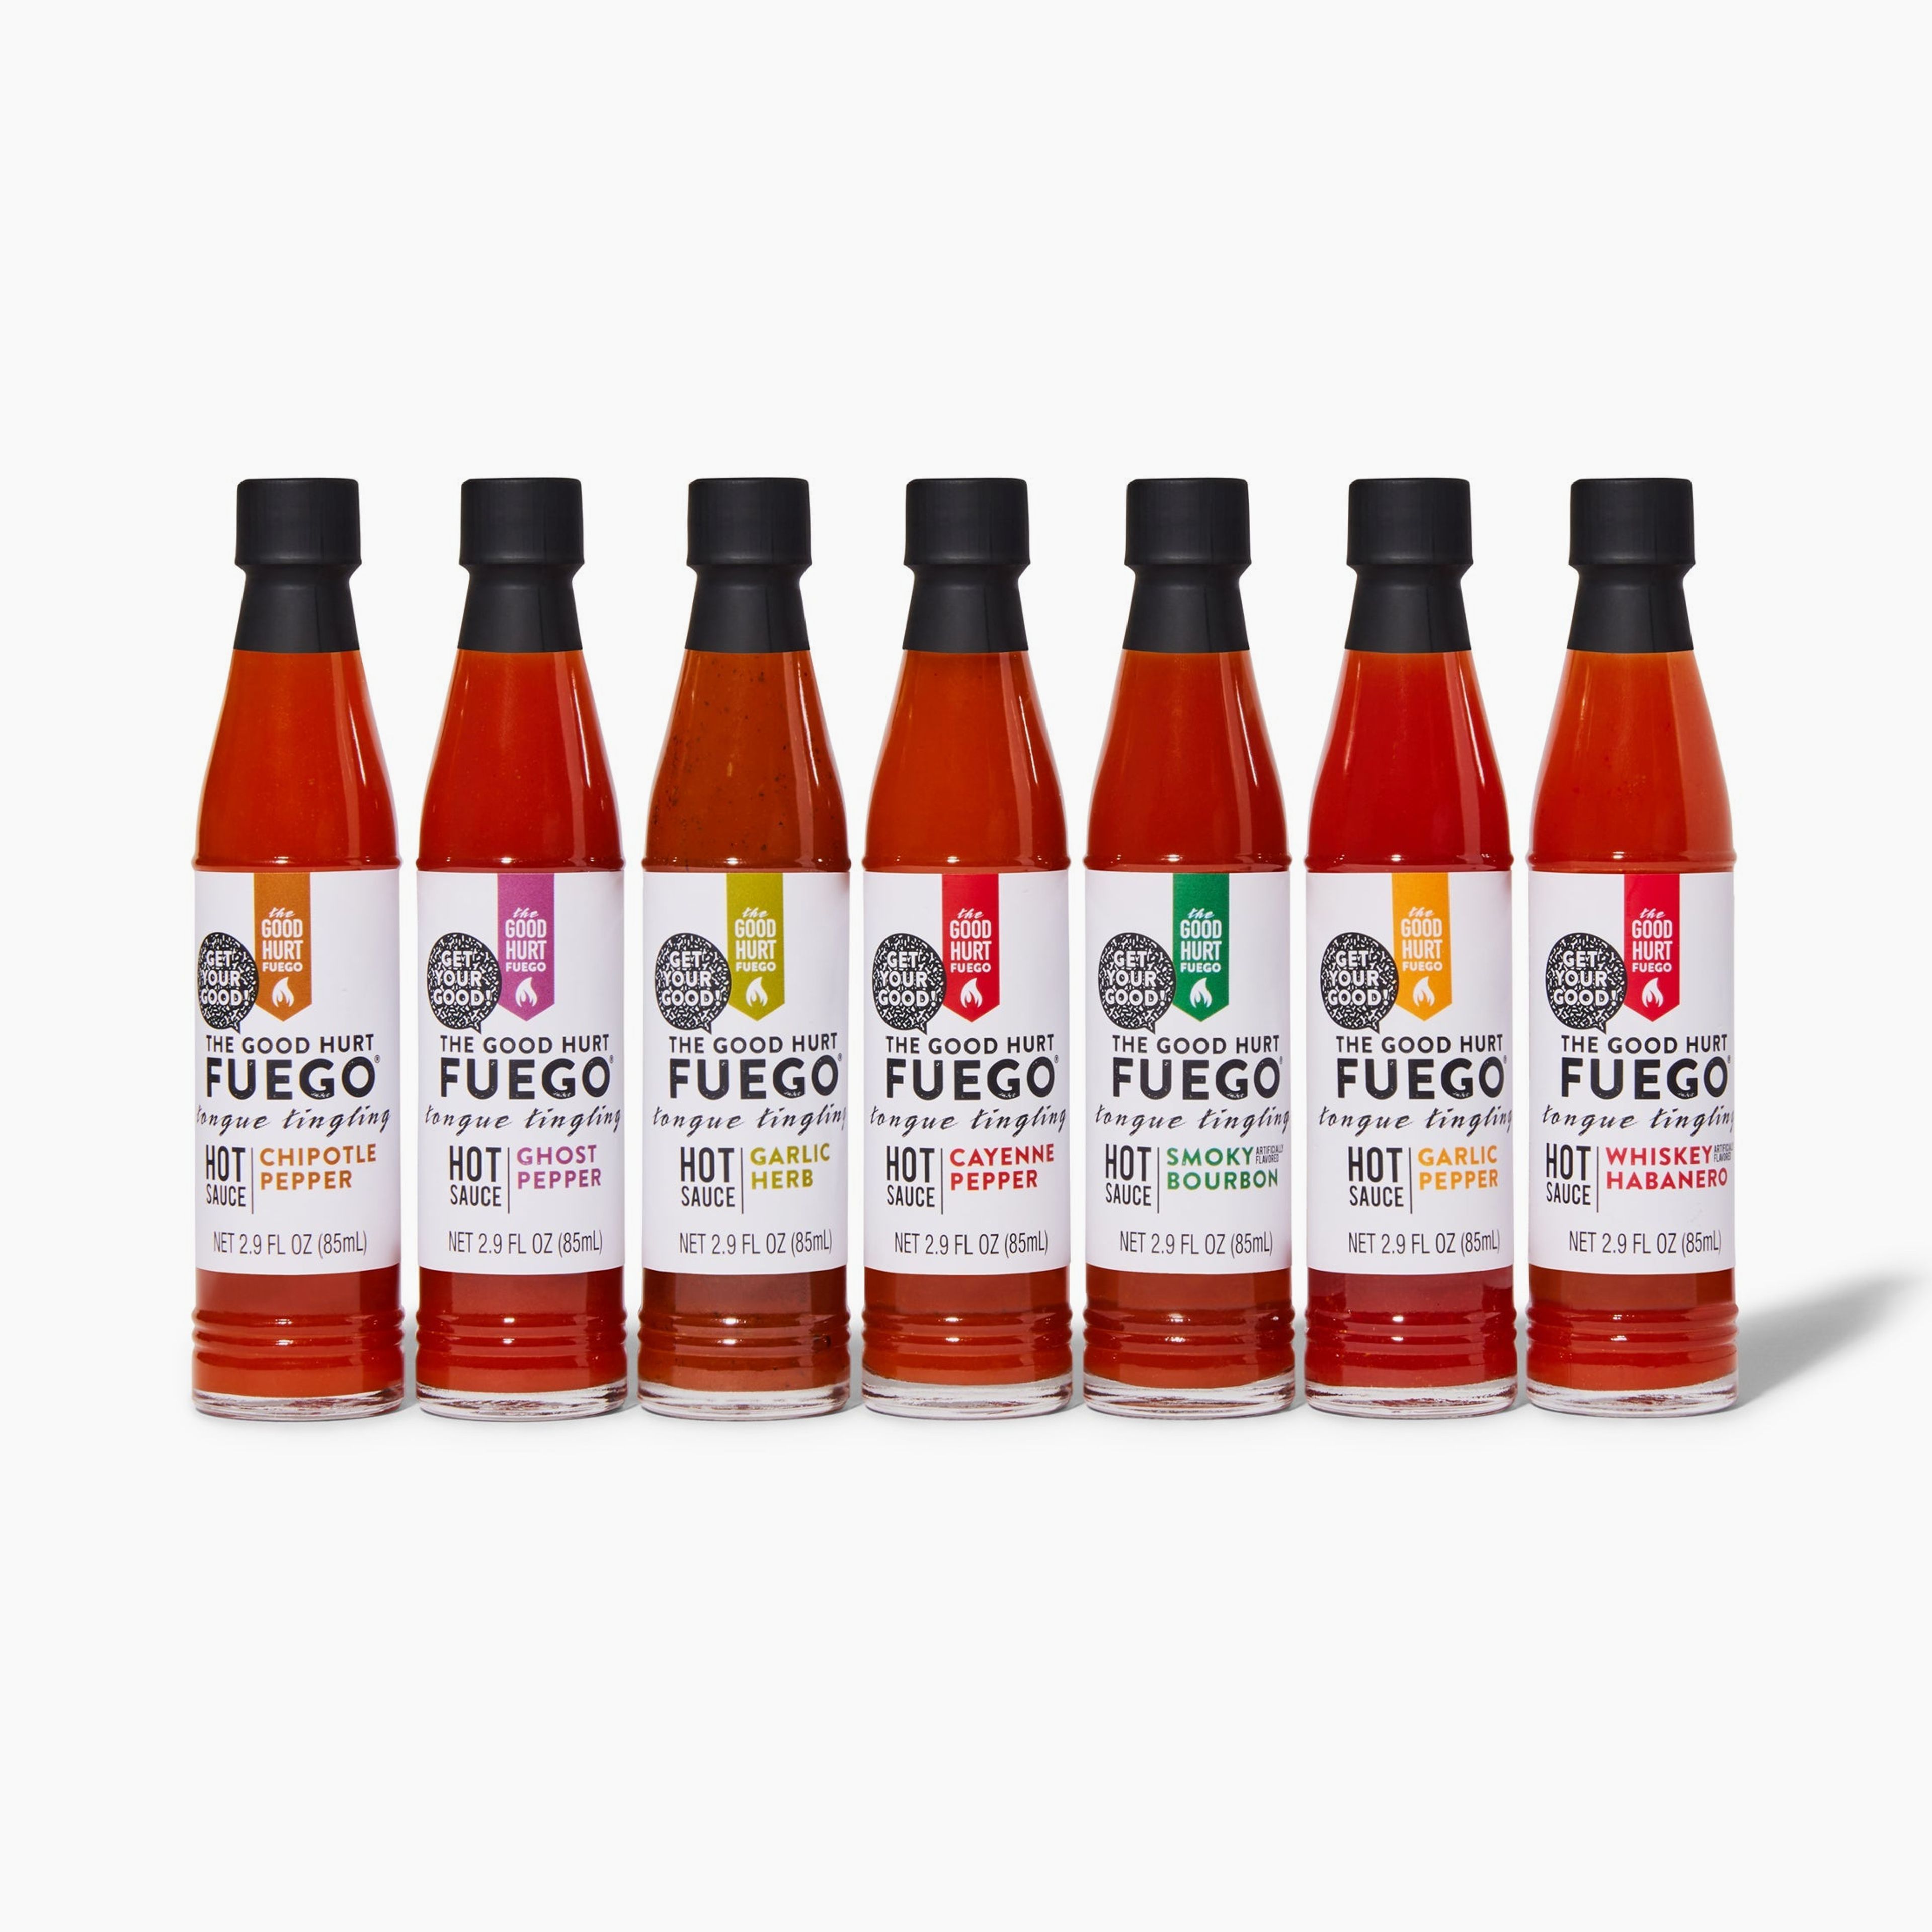 The Good Hurt Fuego Hot Sauce Gift Set, Pack of 7